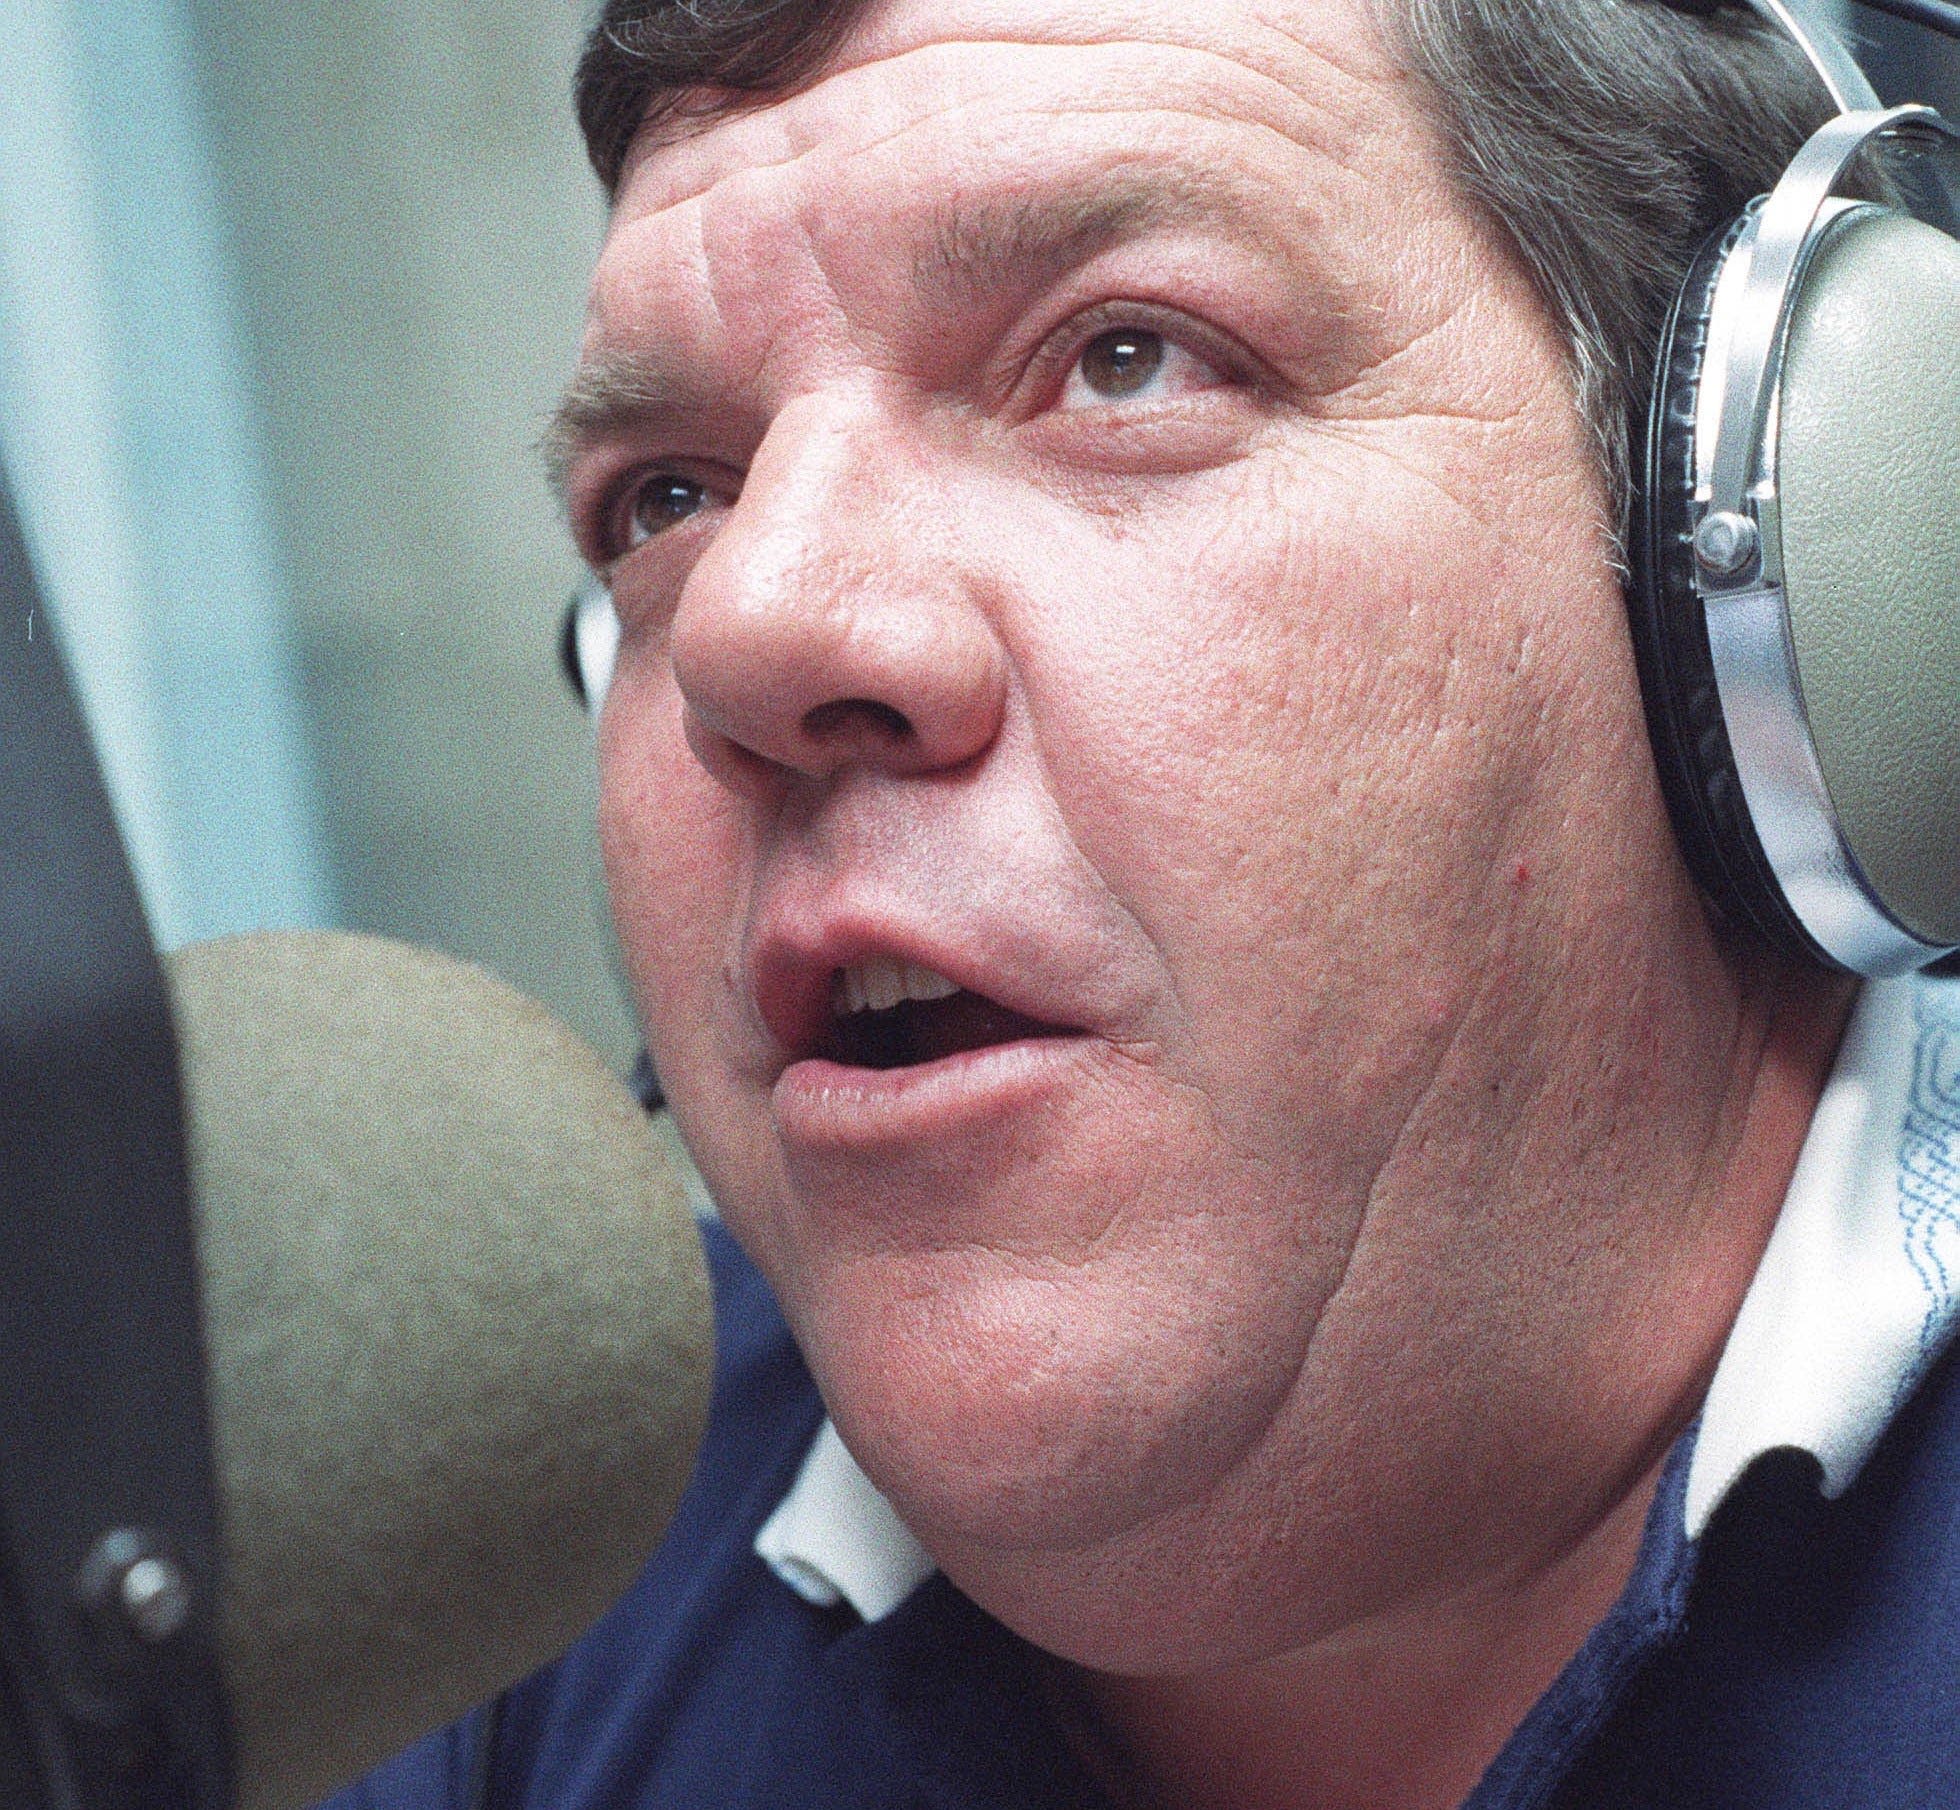 Gene Frenette: More than his large body, David Lamm's voice, words carried significant weight